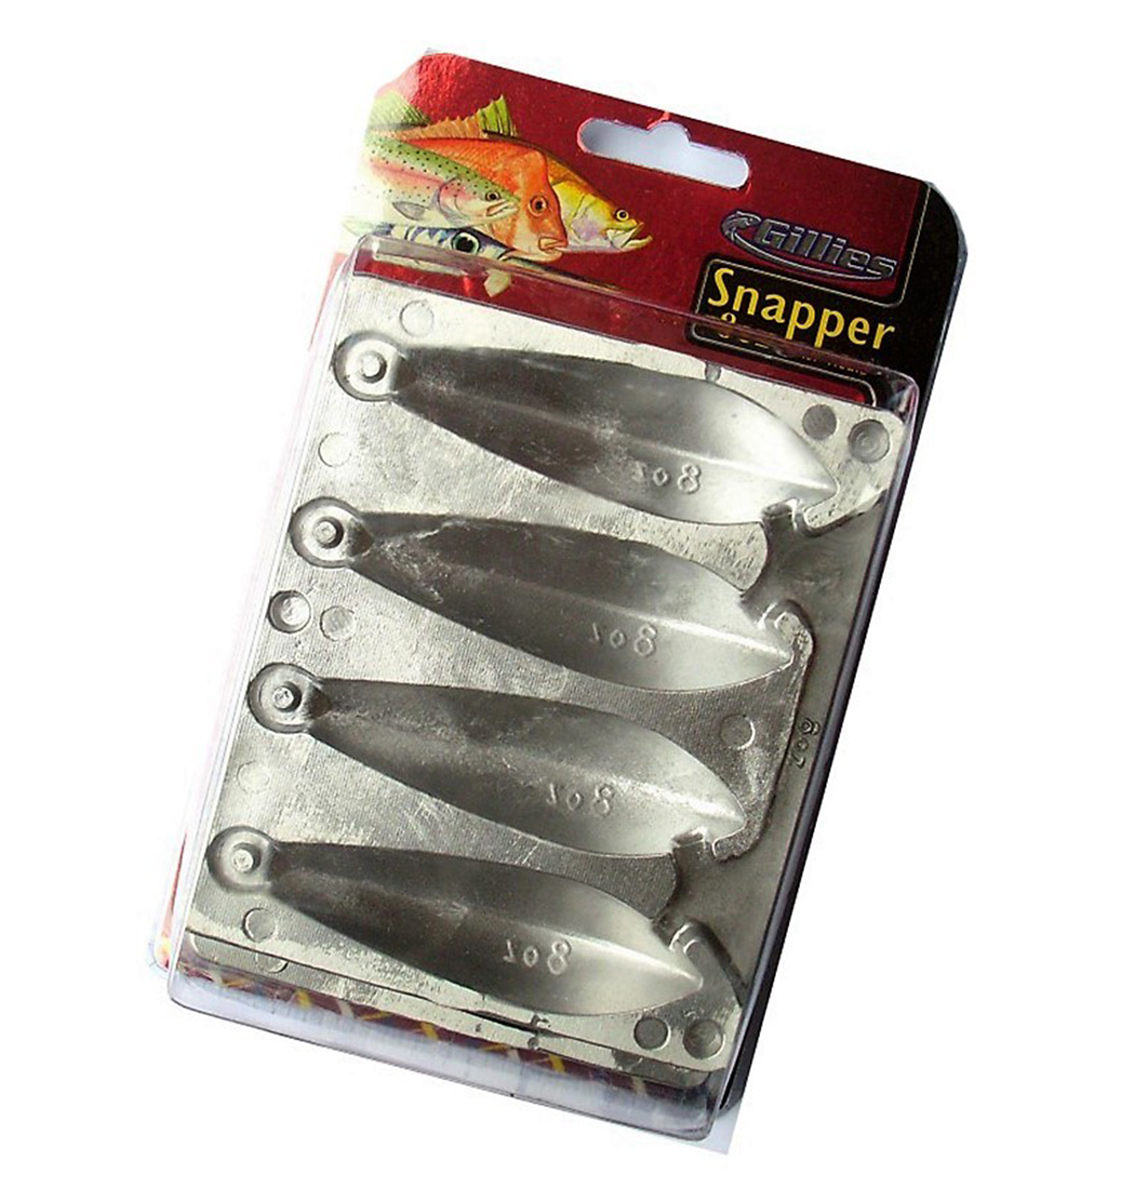 Gillies 8oz Snapper Sinker Mould - Makes 4 Snapper Sinkers at a